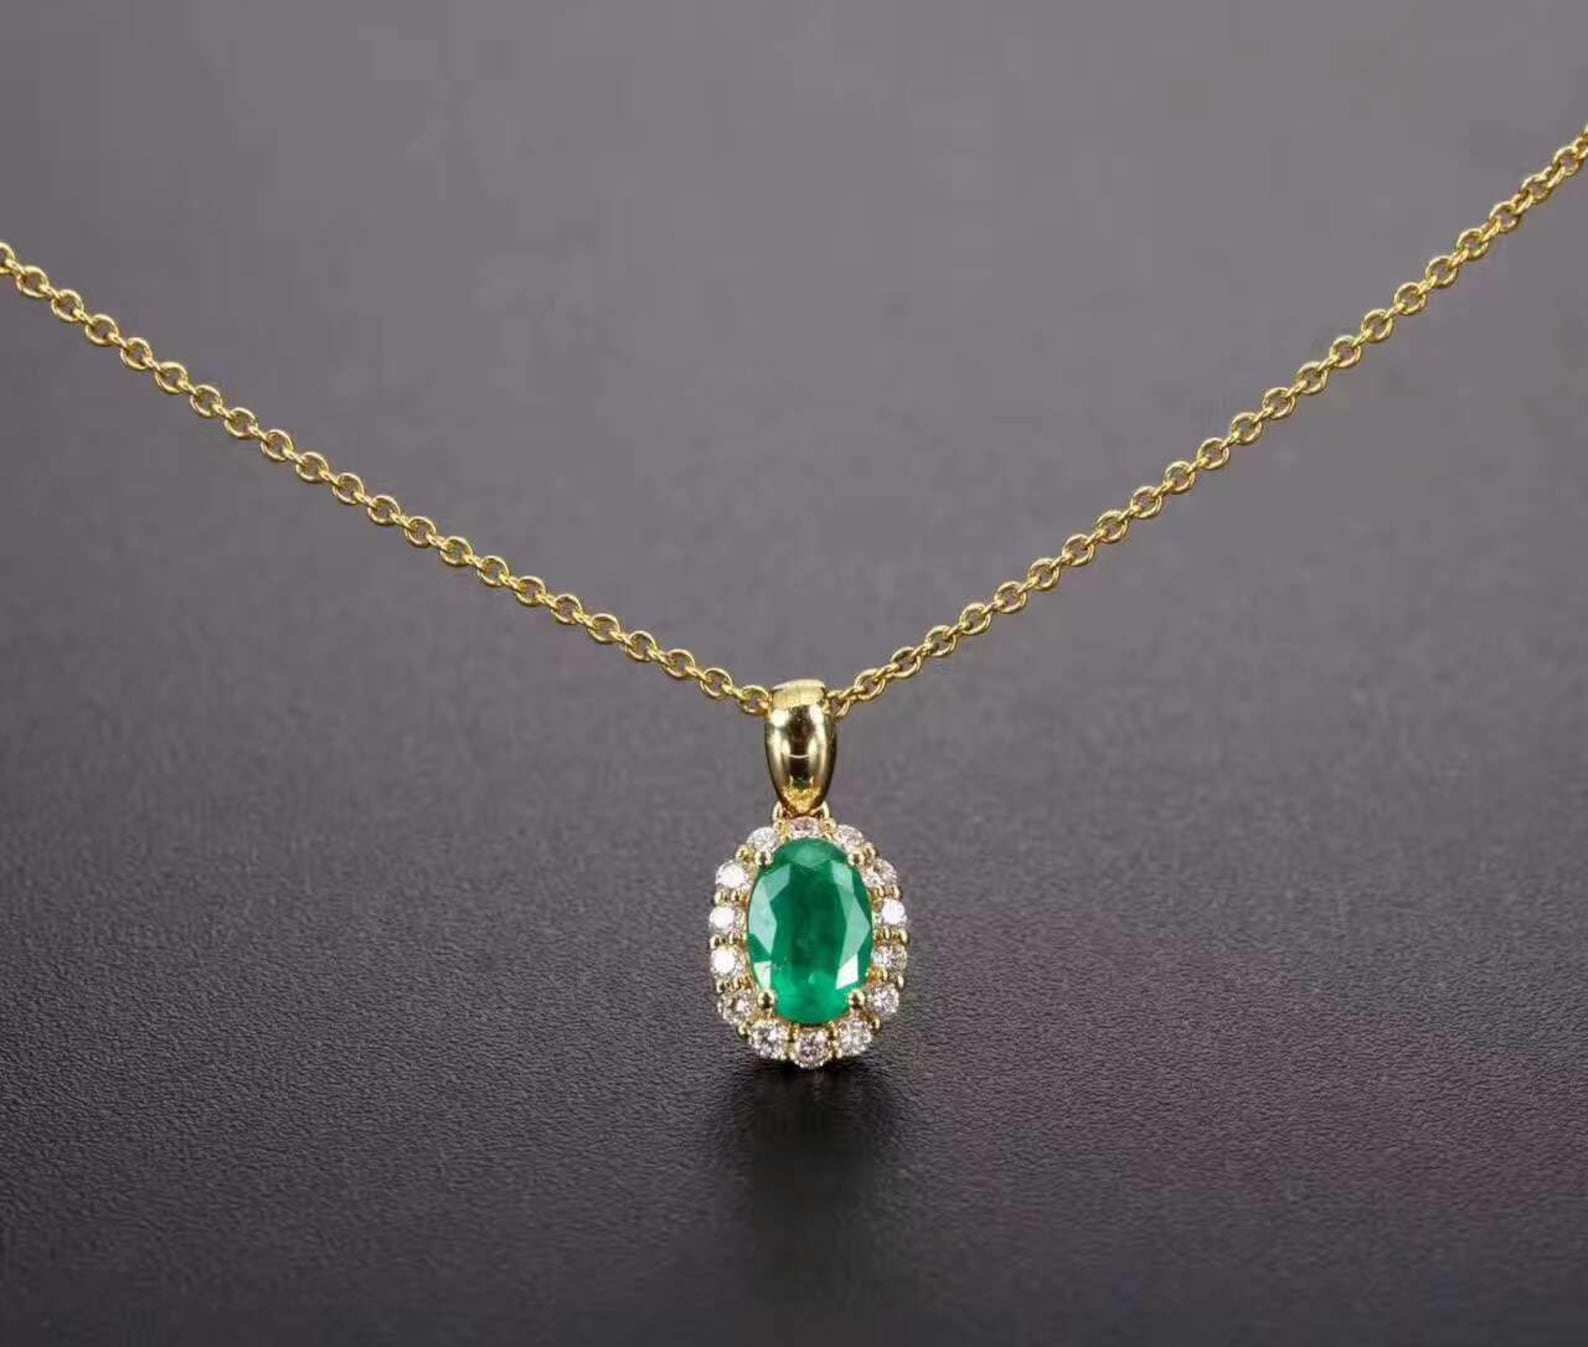 Oval Shaped Emerald Diamond Pendant in 18k Yellow Gold - Etsy